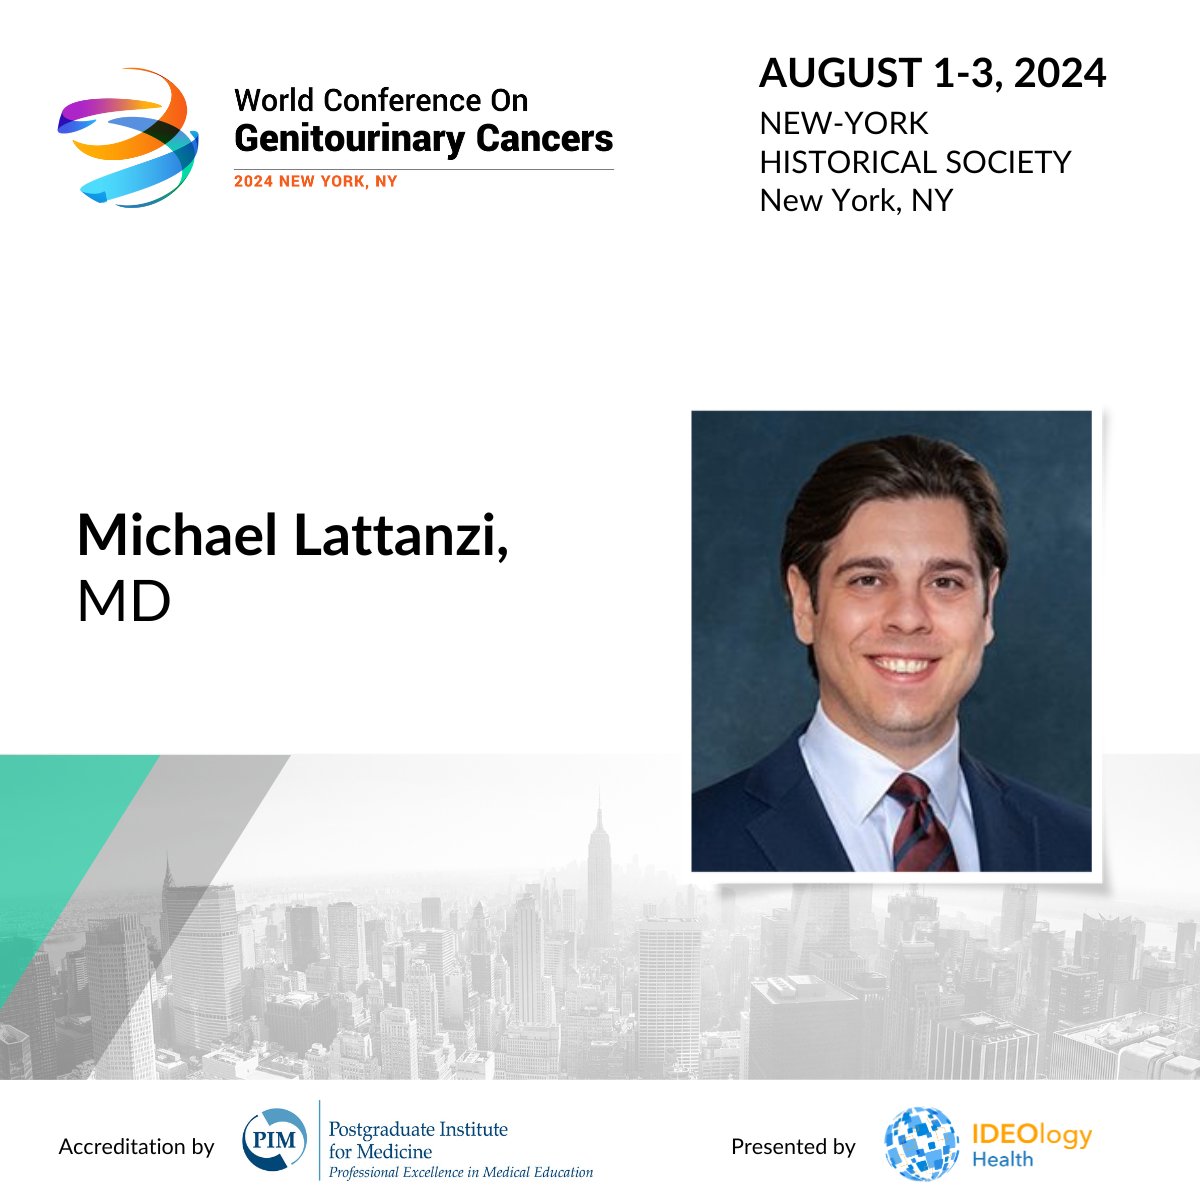 Exciting news! Dr. Michael Lattanzi joins the esteemed #WorldGU24 faculty! Get ready to connect with top experts in the #GUcancer field in the big apple 🍎🗽 Registration is now open—view the faculty roster and secure your spot today: hubs.la/Q02sjj660